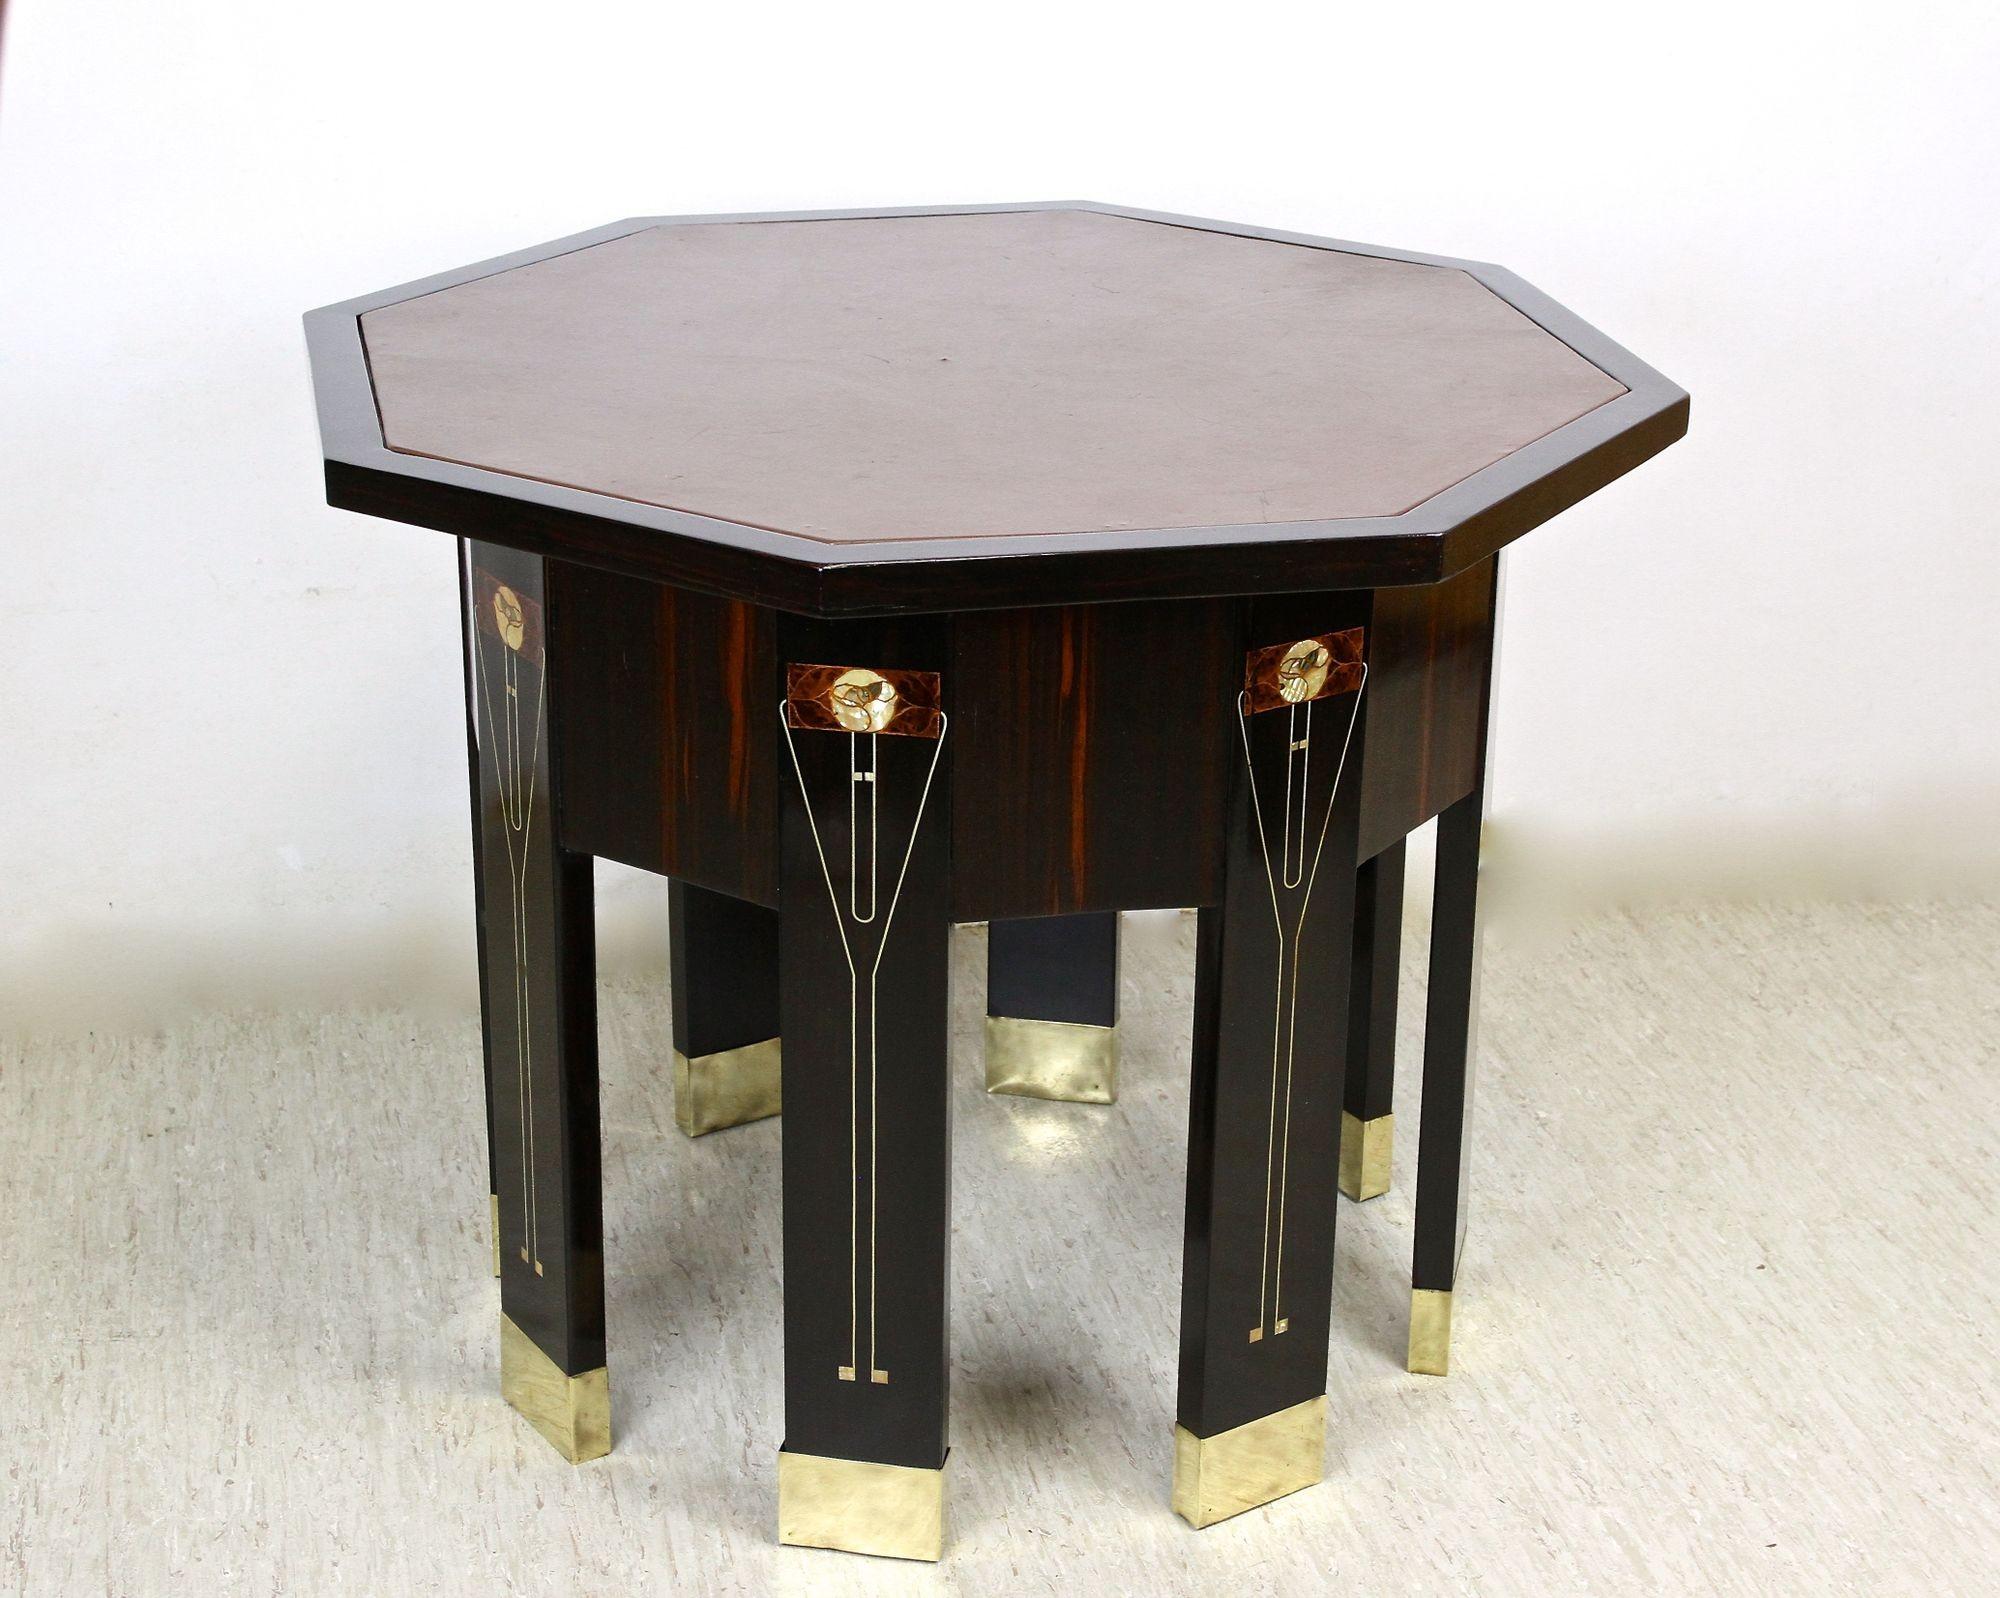 Art Nouveau Octagonal Palisander Table with Mother of Pearl Inlays, AT ca. 1905 For Sale 8